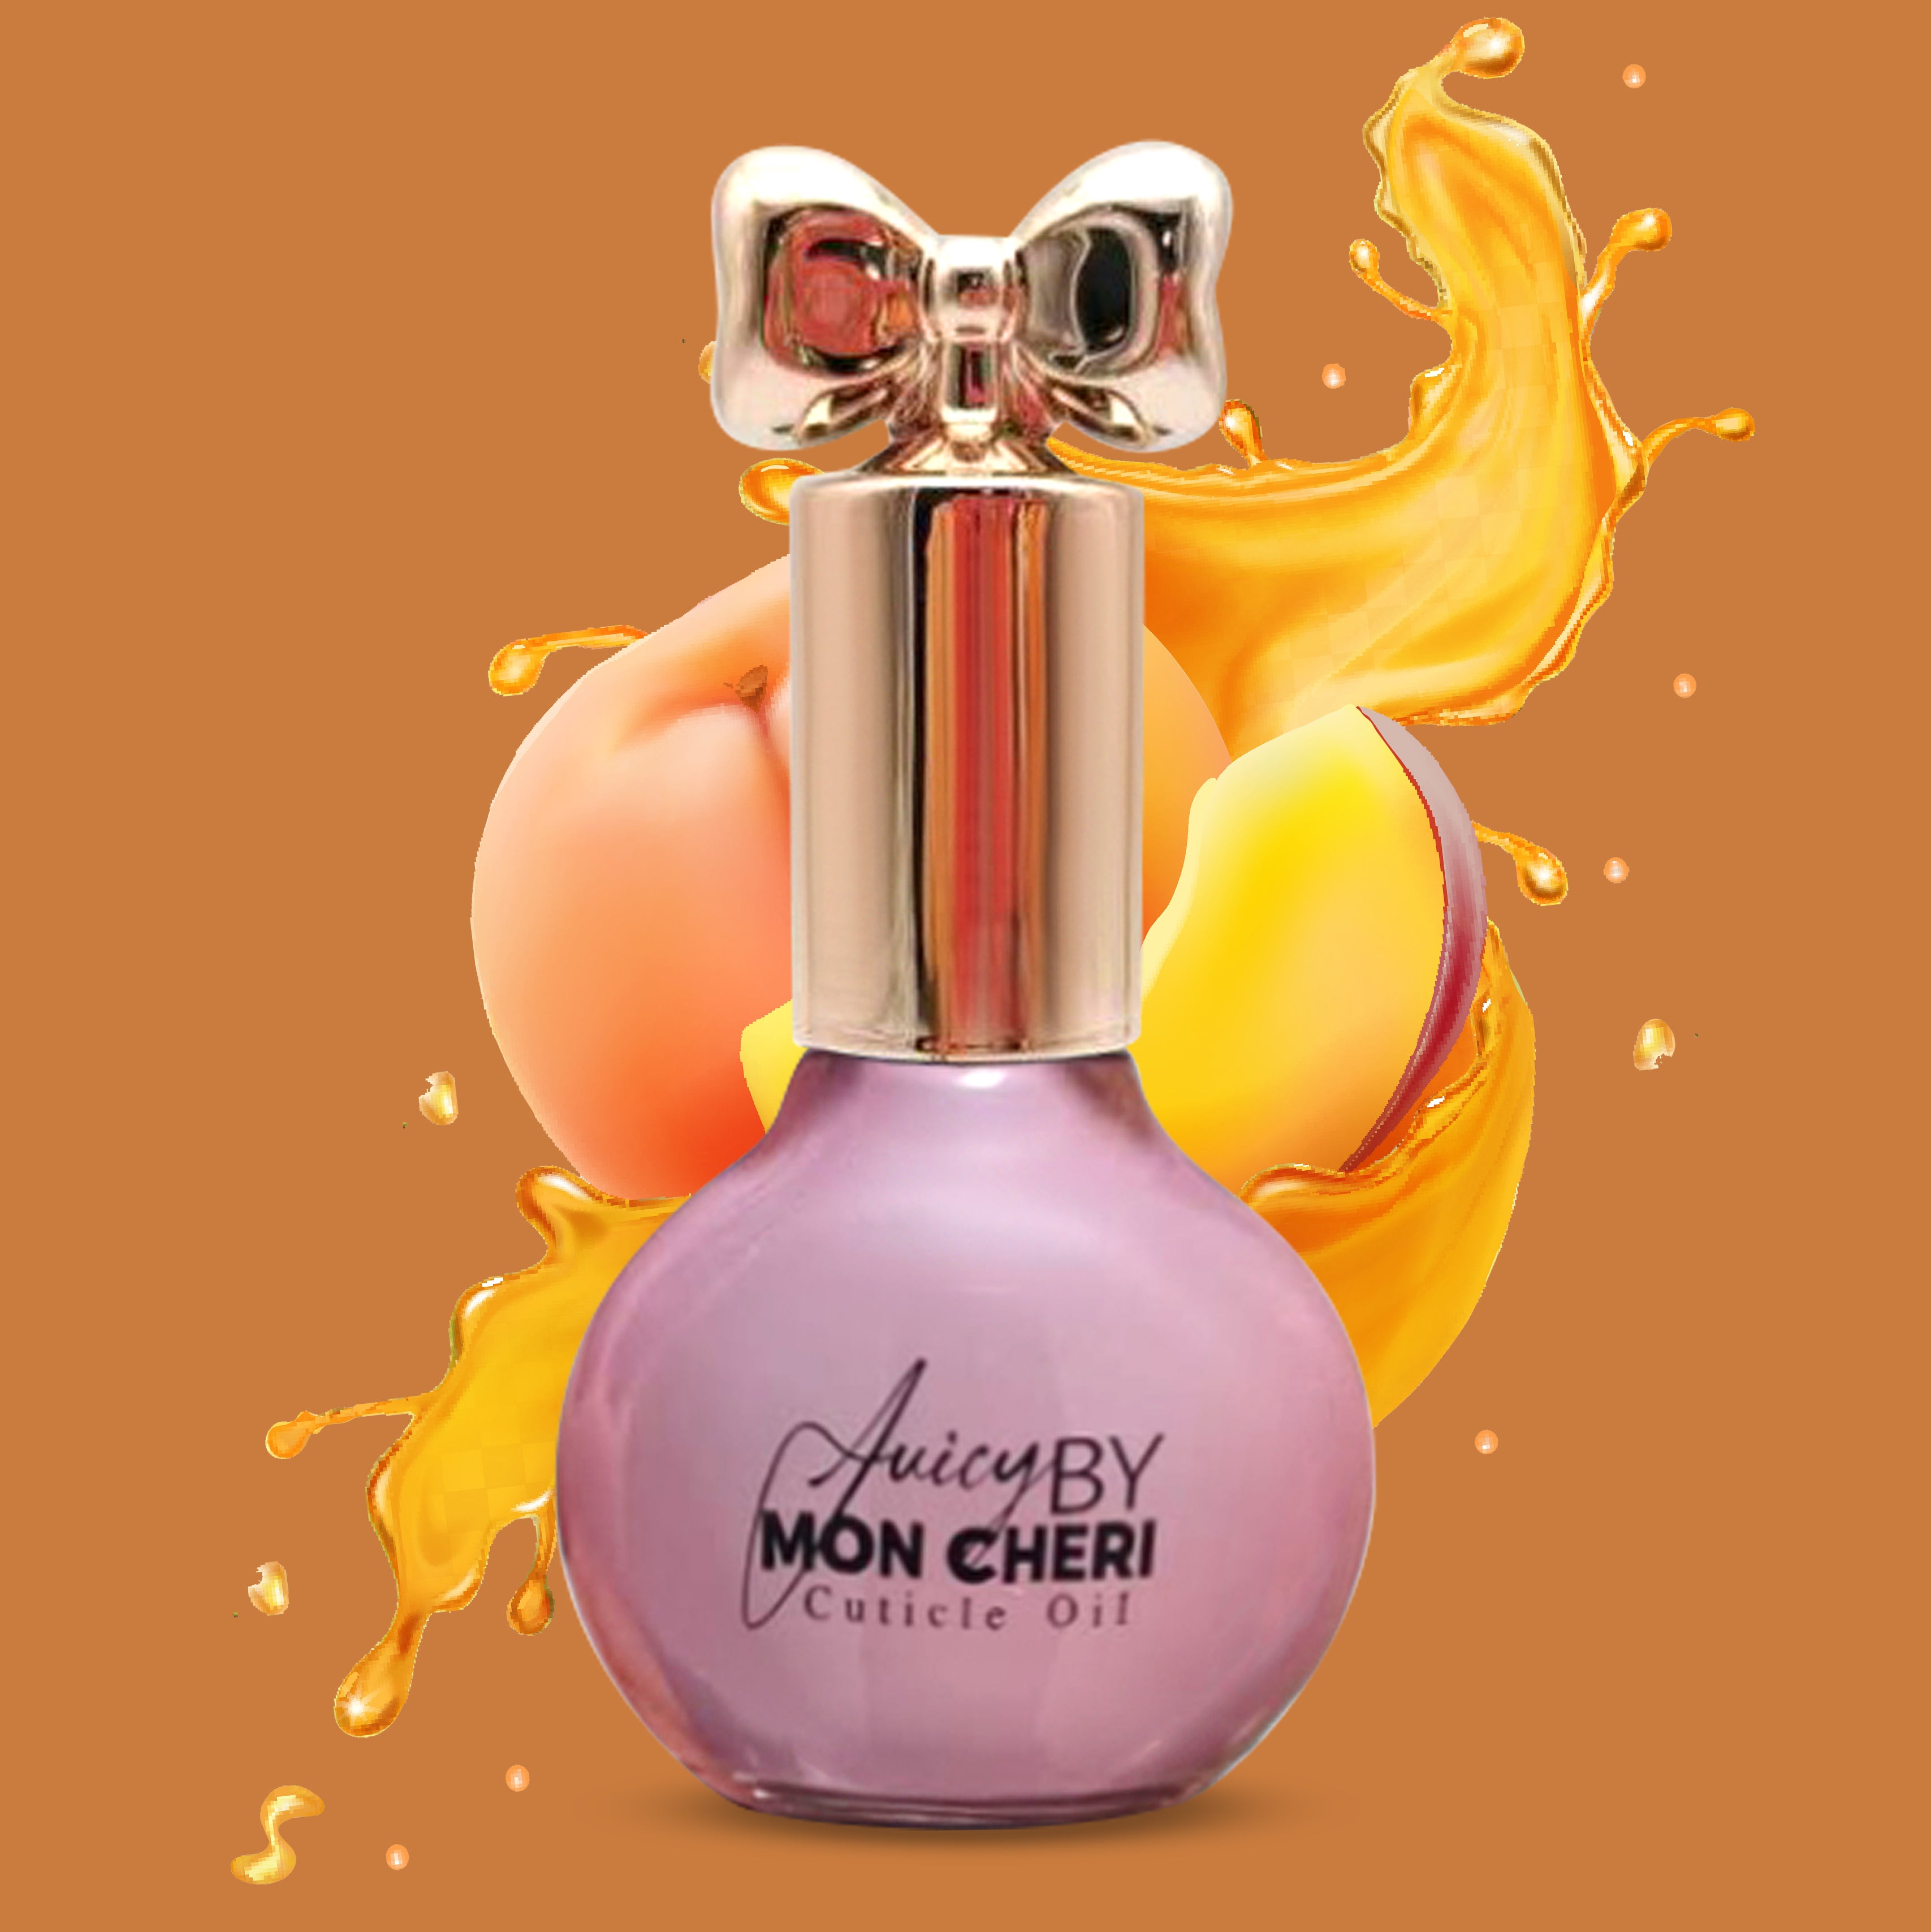 Attract and Entice with Allure Cuticle Oil by Juicy by Mon Cheri (Pher –  ByMonCheri